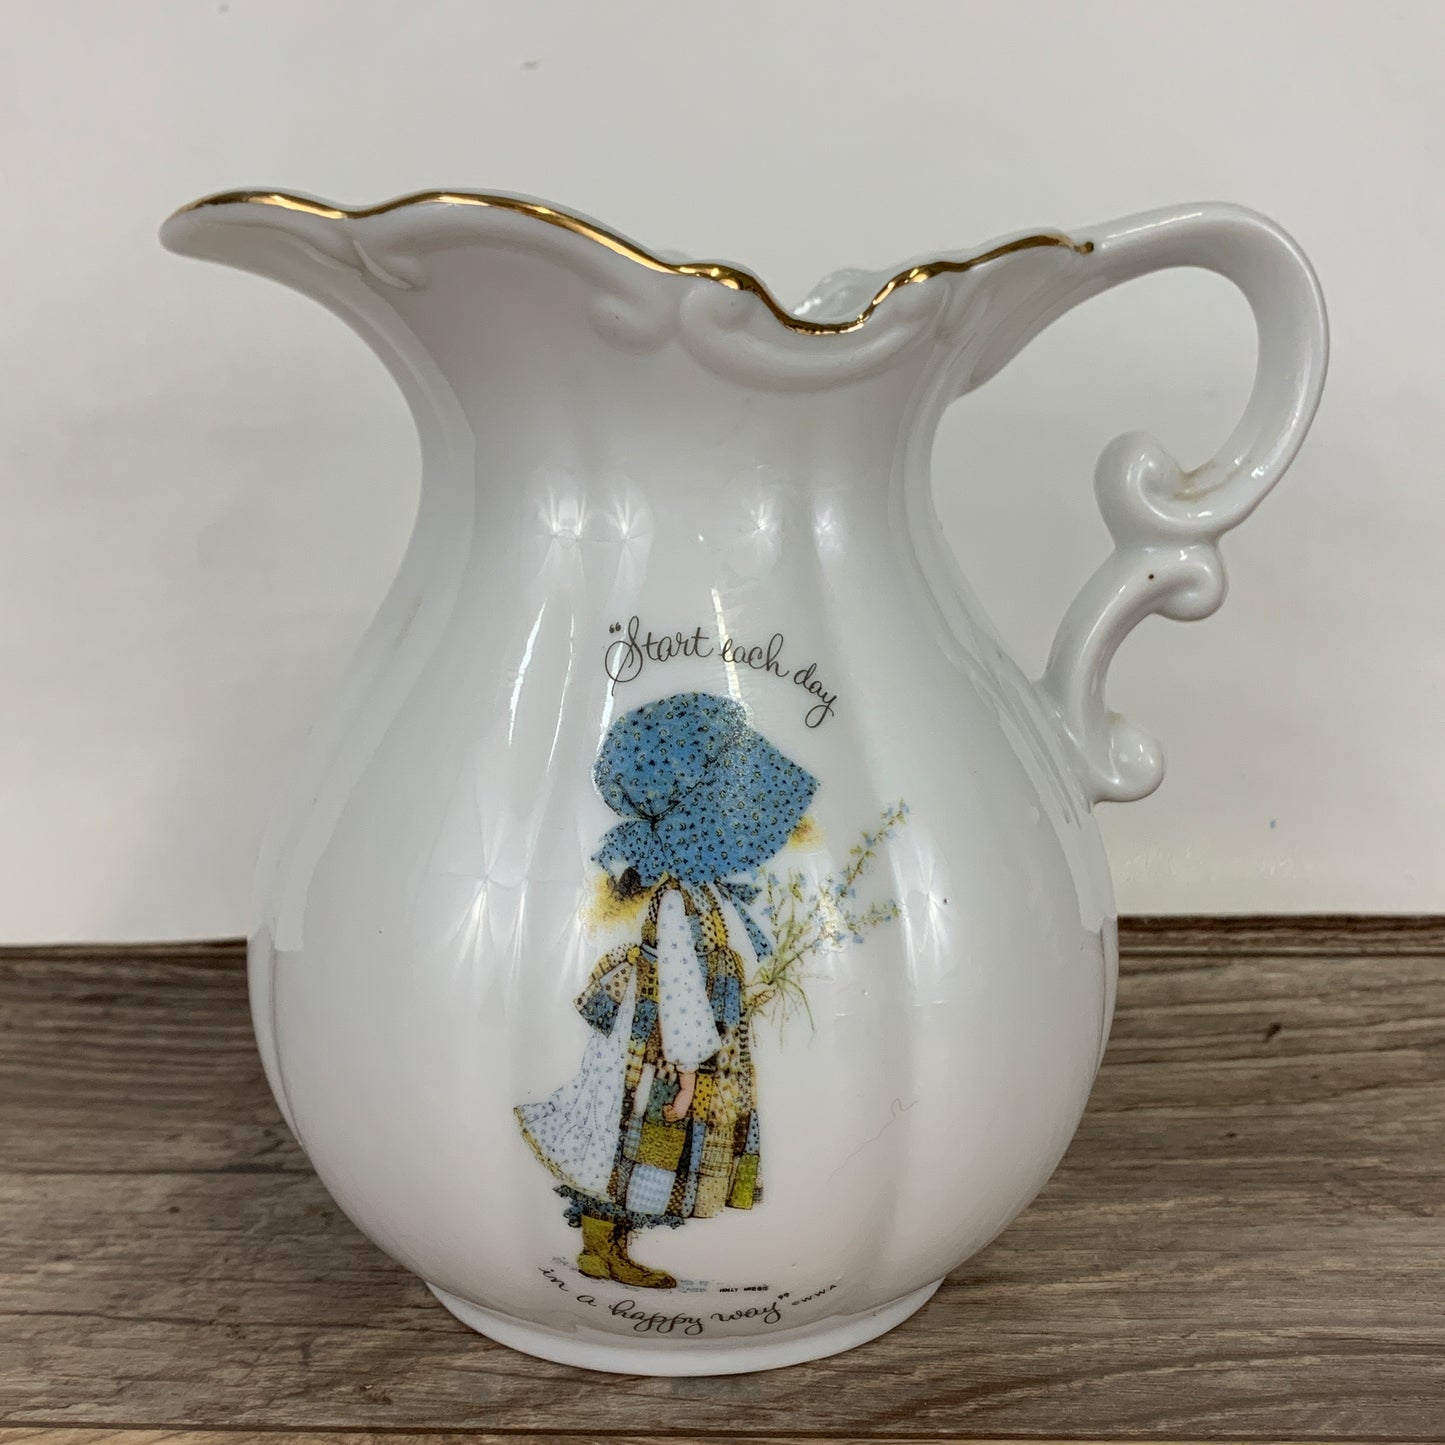 Holly Hobbie White Porcelain Pitcher "Start Each Day in a Happy Way"